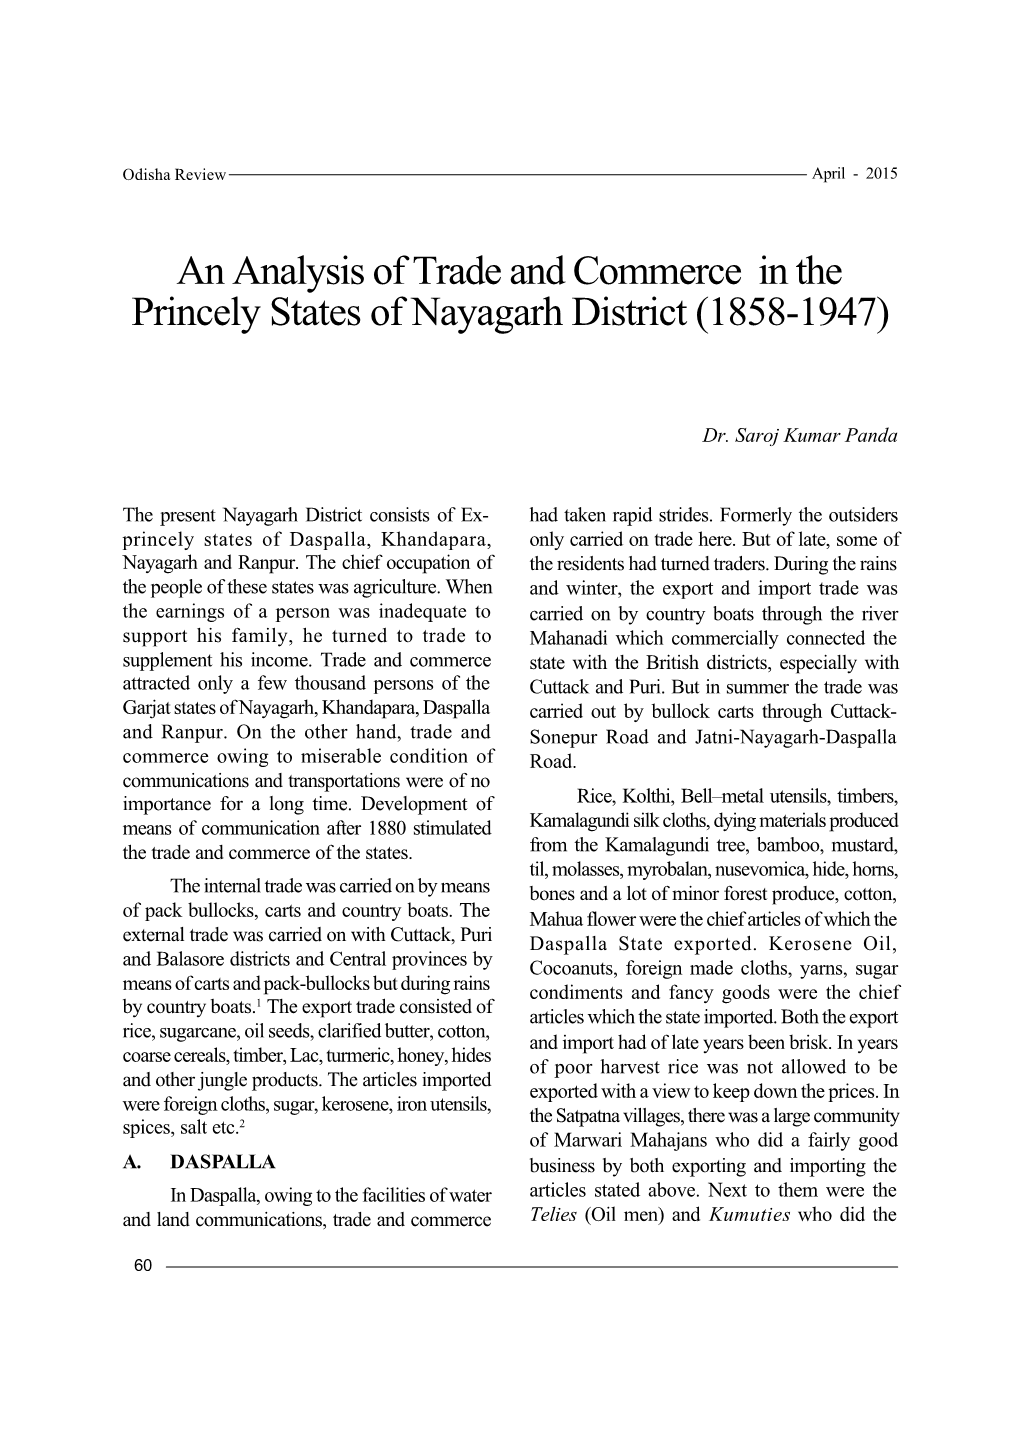 An Analysis of Trade and Commerce in the Princely States of Nayagarh District (1858-1947)